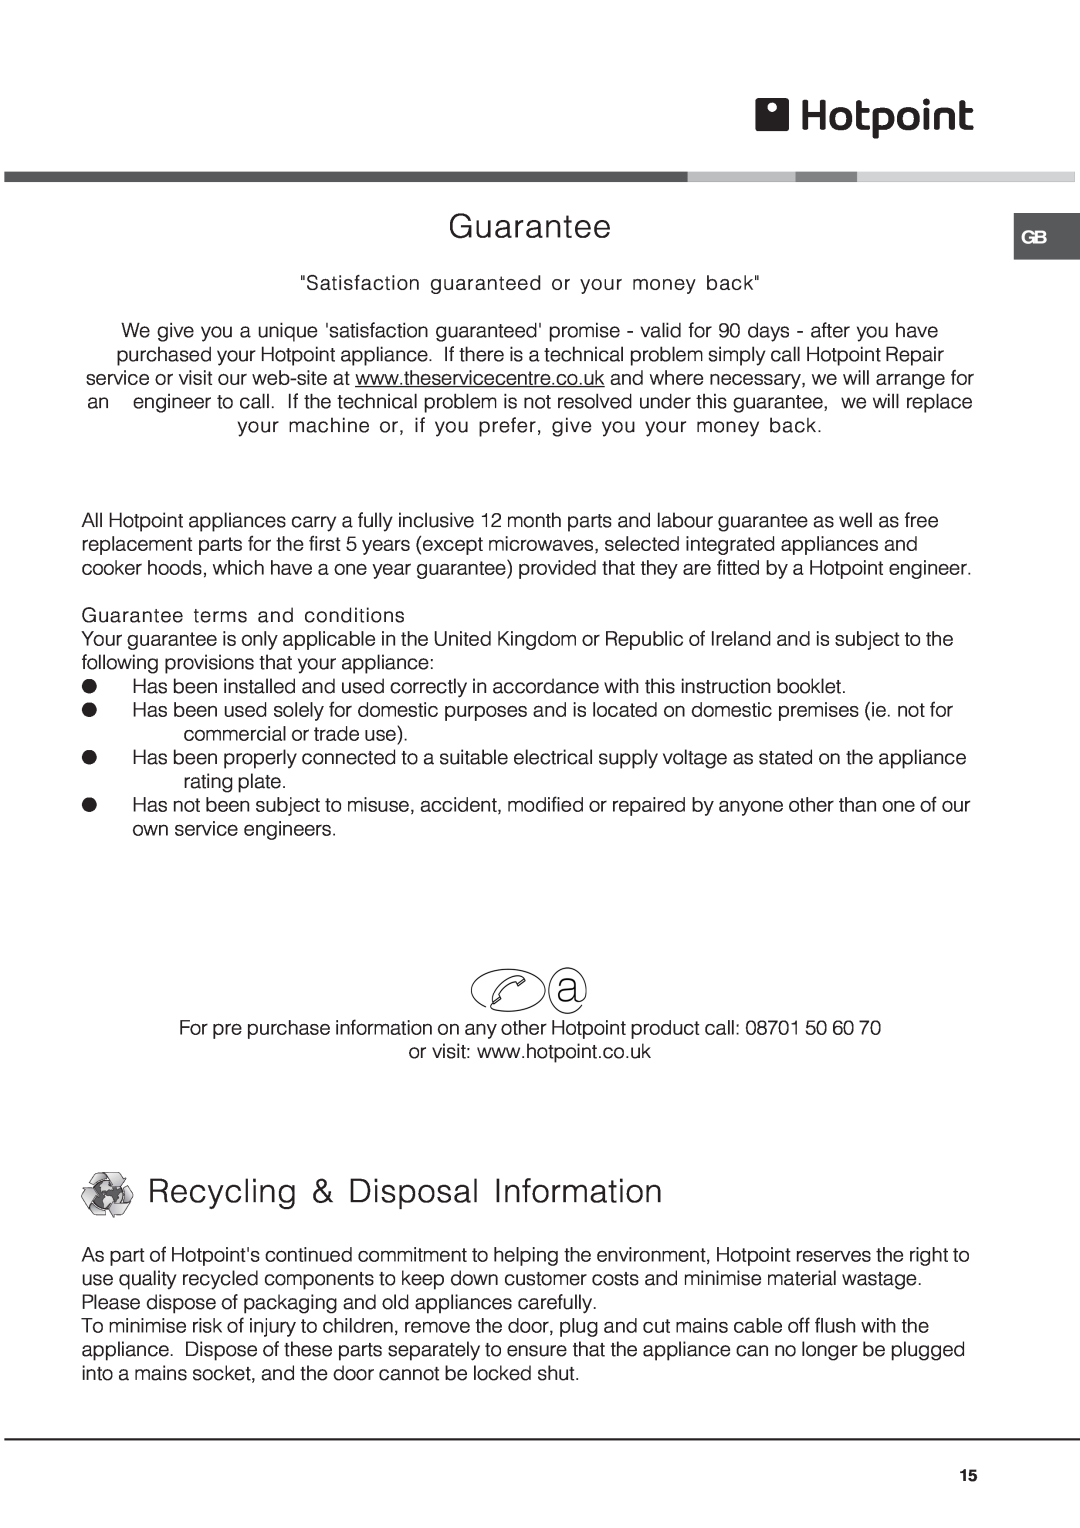 Hotpoint CRA 641 DC operating instructions Guarantee, Recycling & Disposal Information 